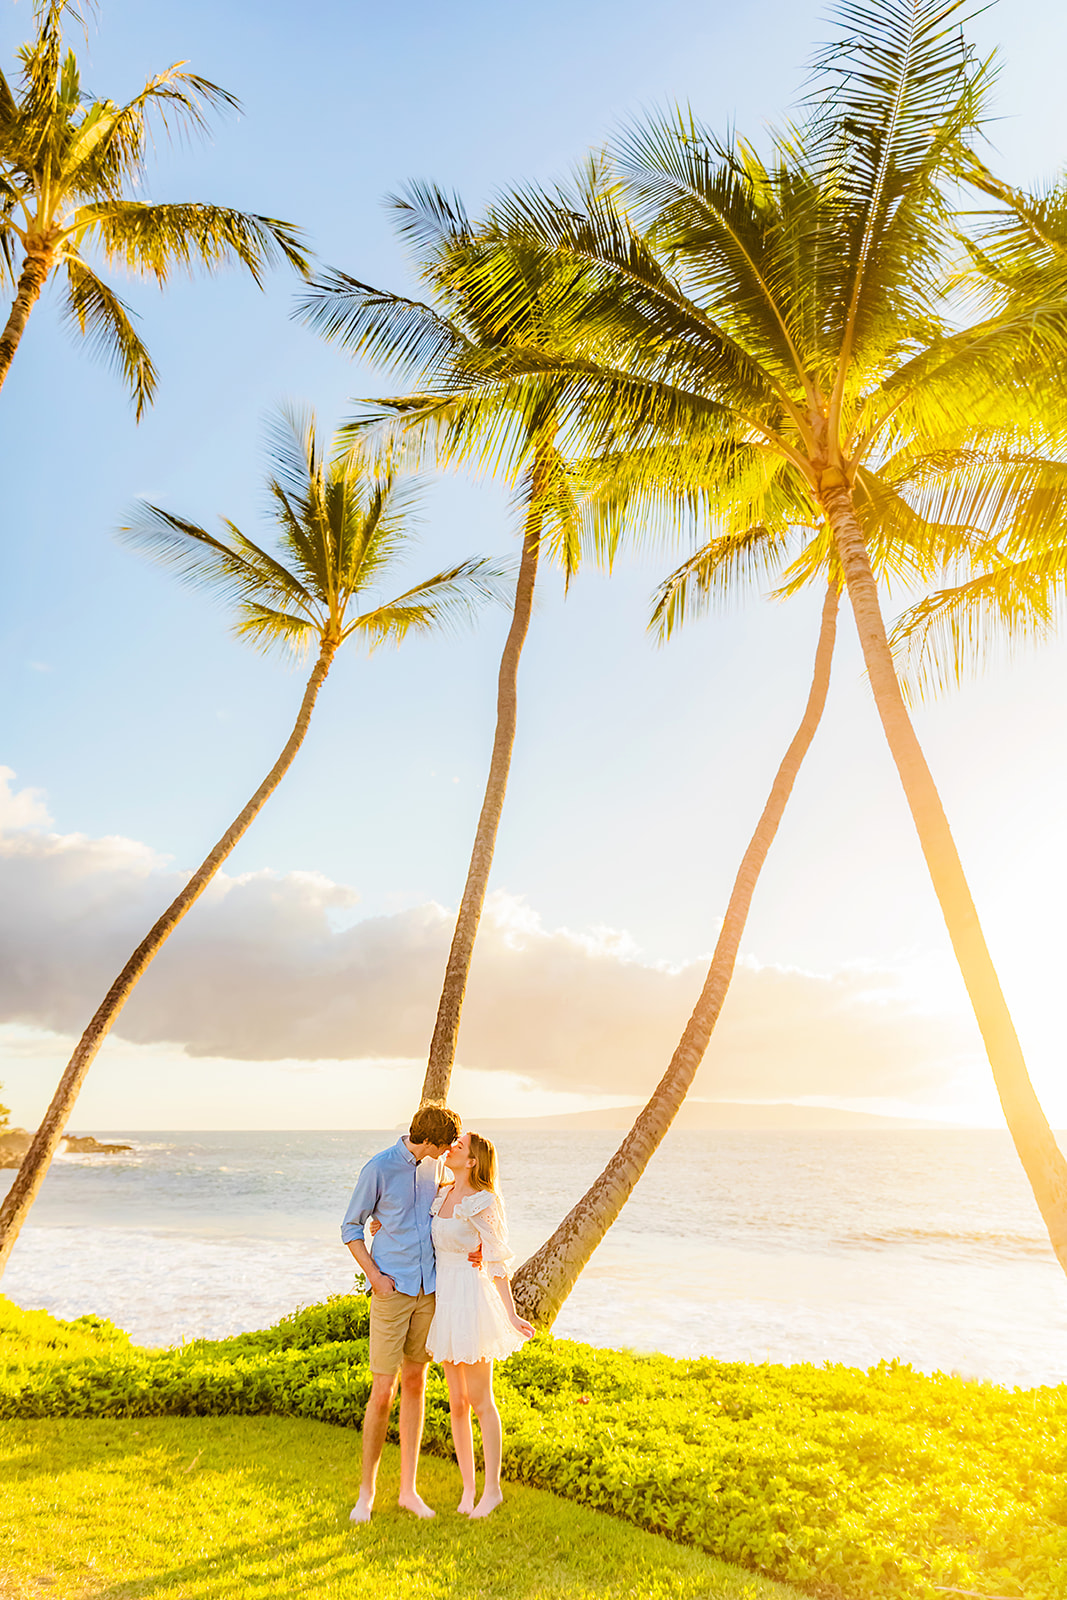 Mia Maples wearing a white dress kisses her fiance wearing a blue button-up shirt and khaki shorts during their engagement photo session in Maui.